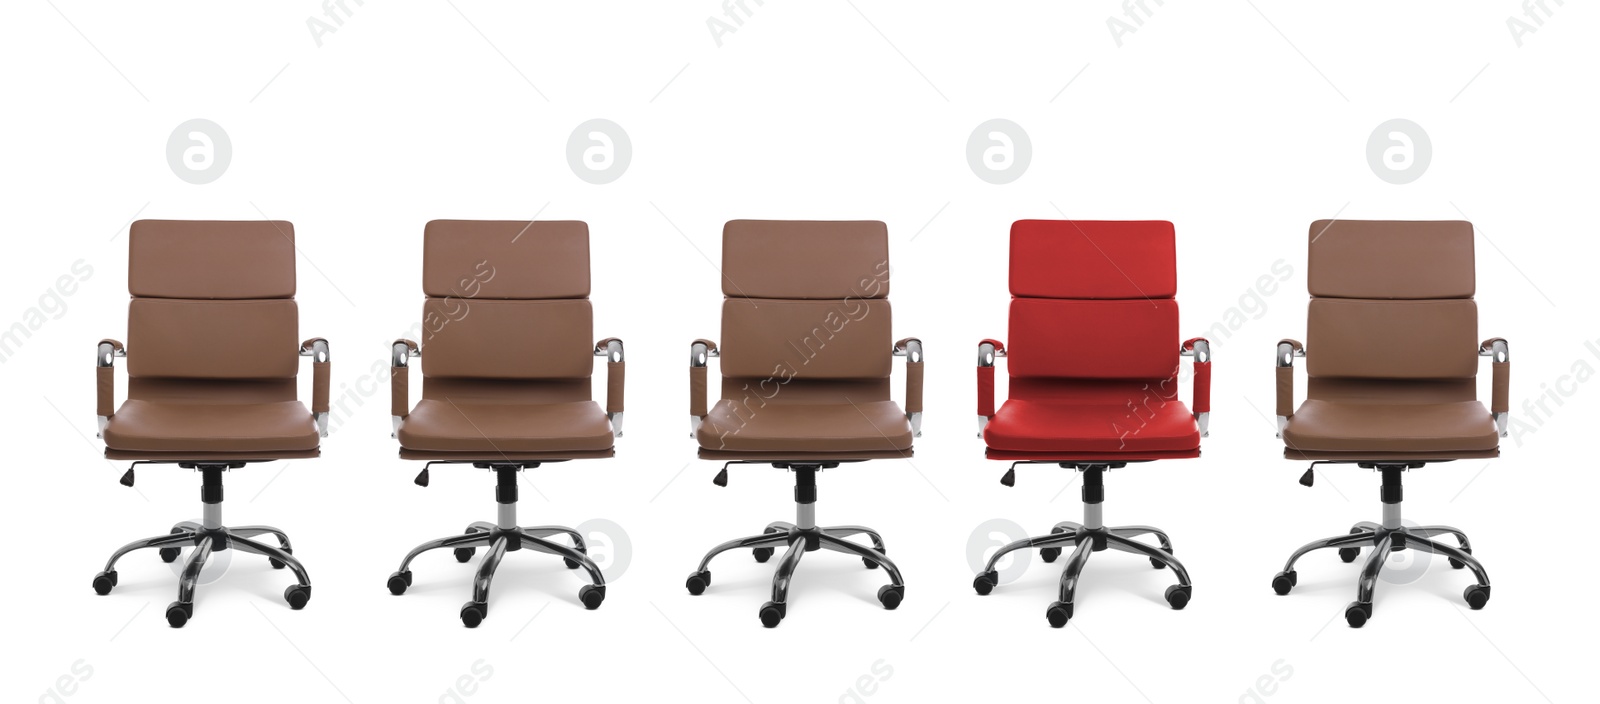 Image of Vacant position. Red office chair among brown ones on white background, banner design